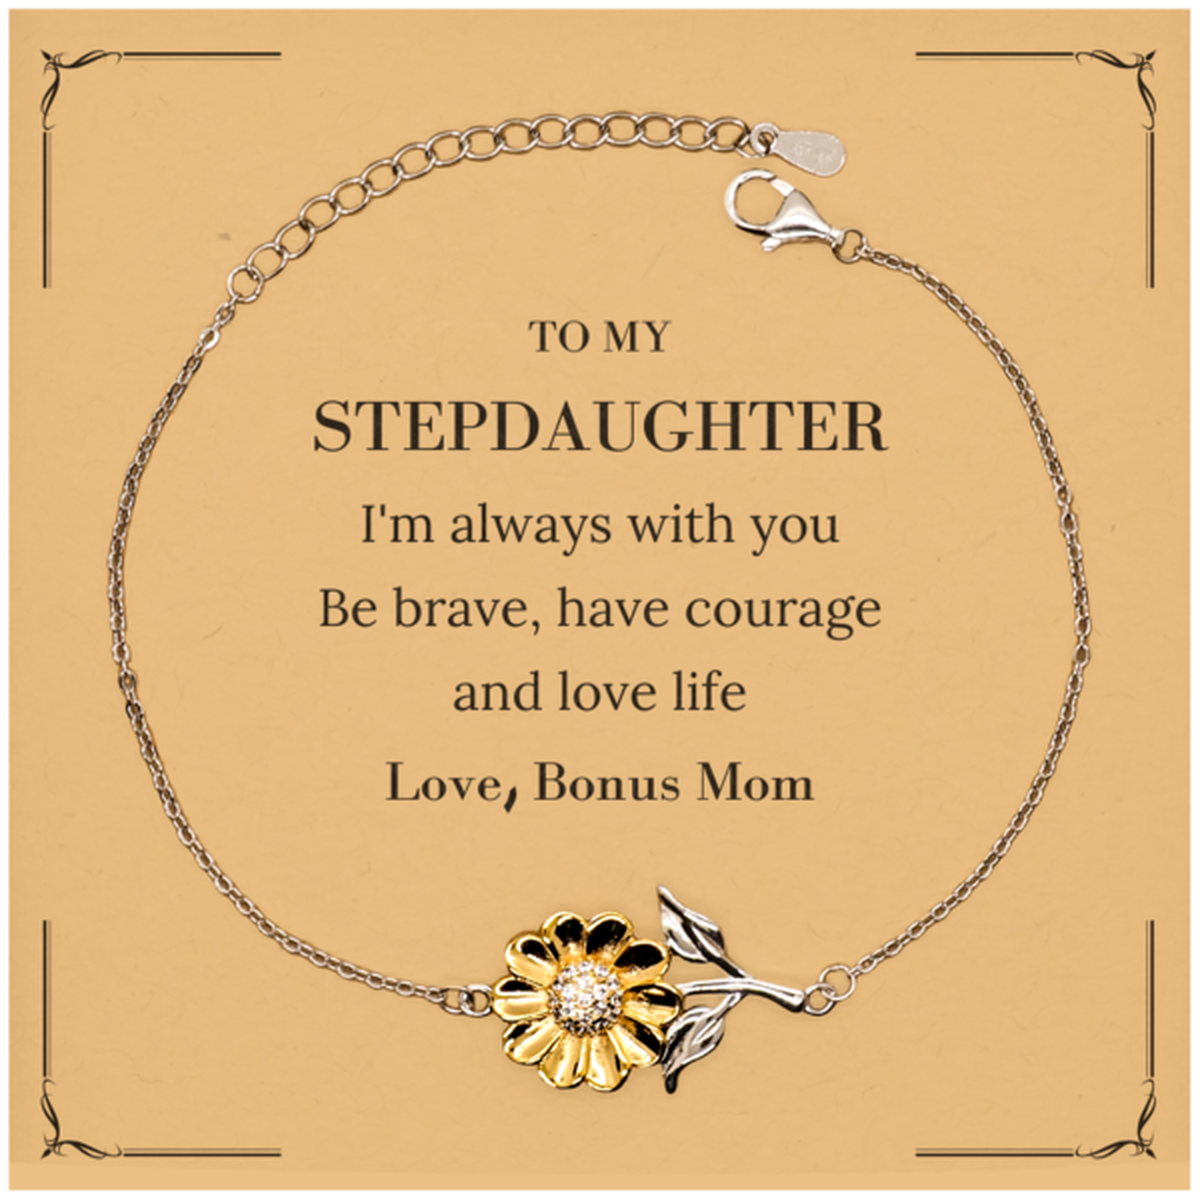 To My Stepdaughter Gifts from Bonus Mom, Unique Sunflower Bracelet Inspirational Christmas Birthday Graduation Gifts for Stepdaughter I'm always with you. Be brave, have courage and love life. Love, Bonus Mom